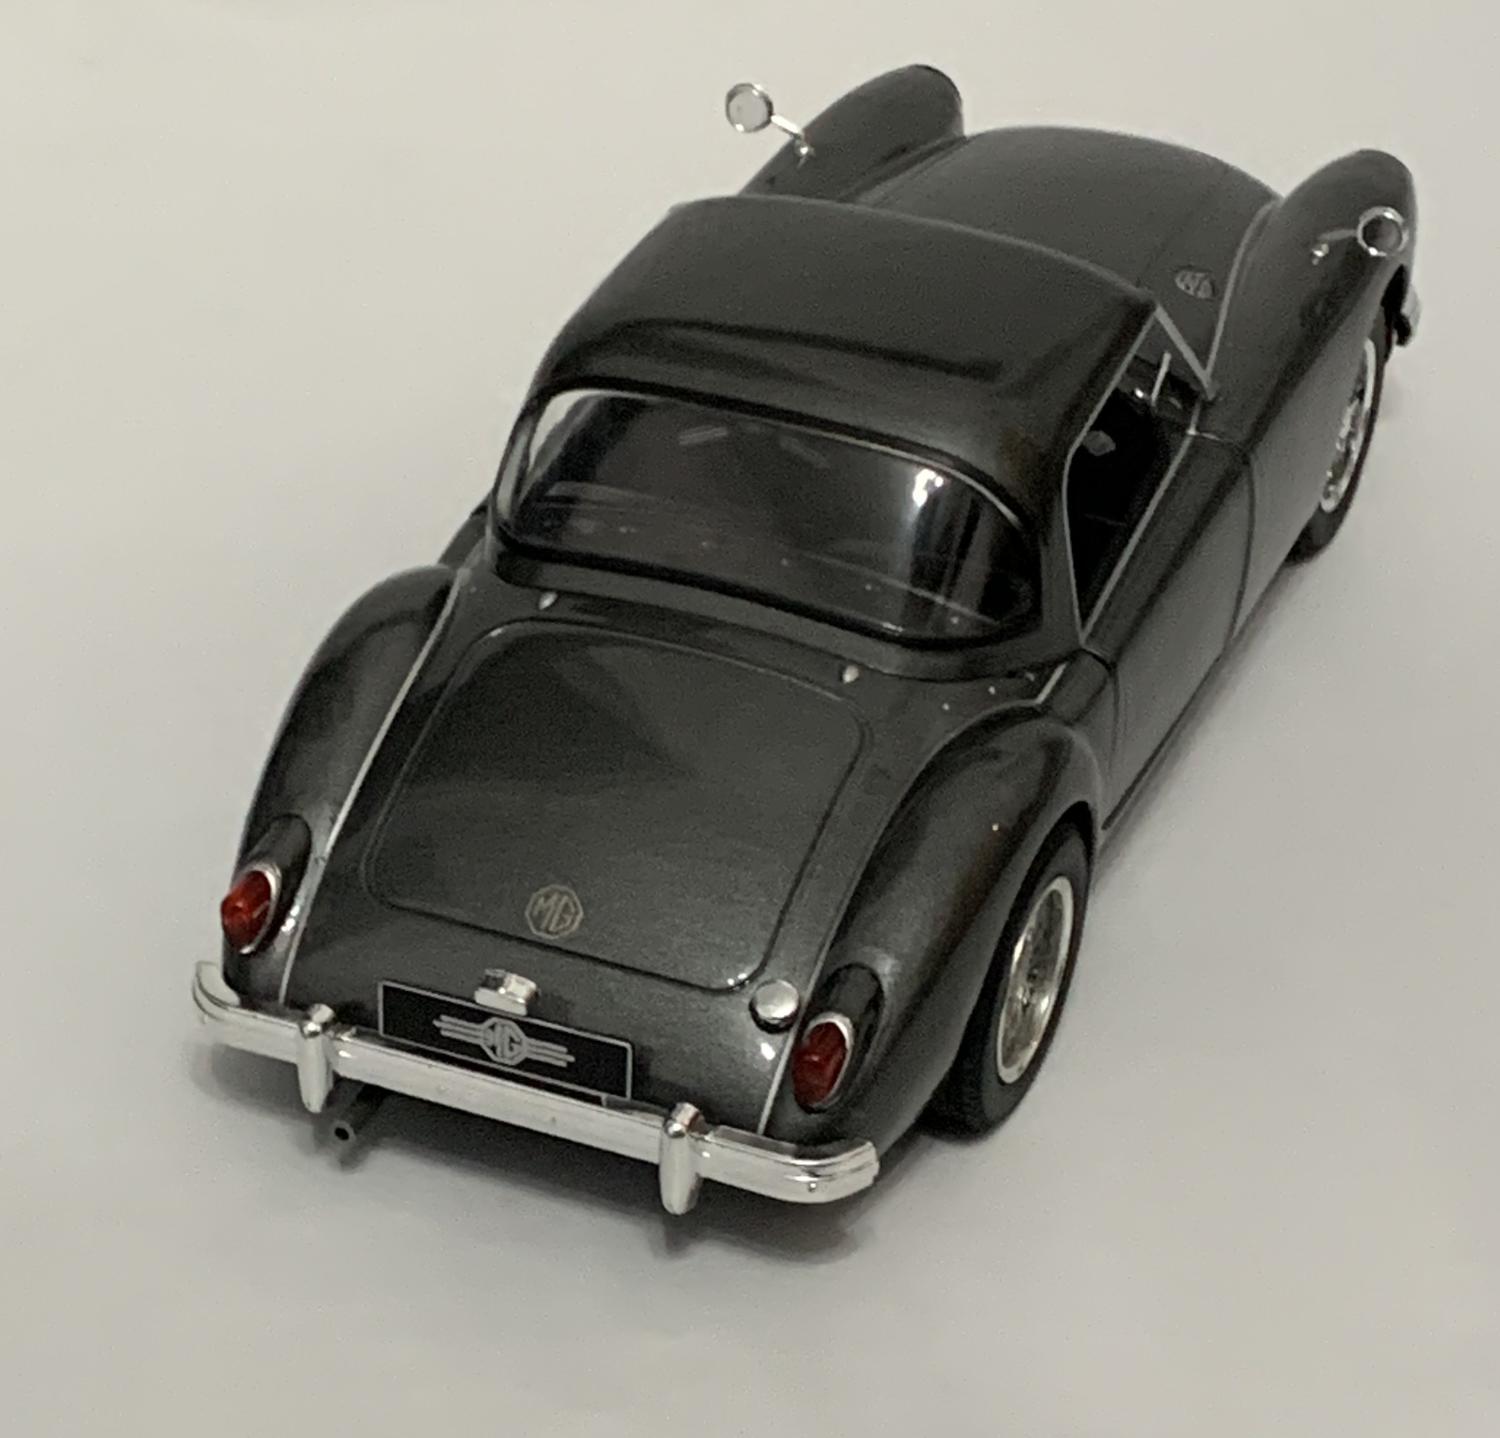 MGA mk1A 1500 1957 in metallic grey 1:18 scale model from Triple 9 Collection